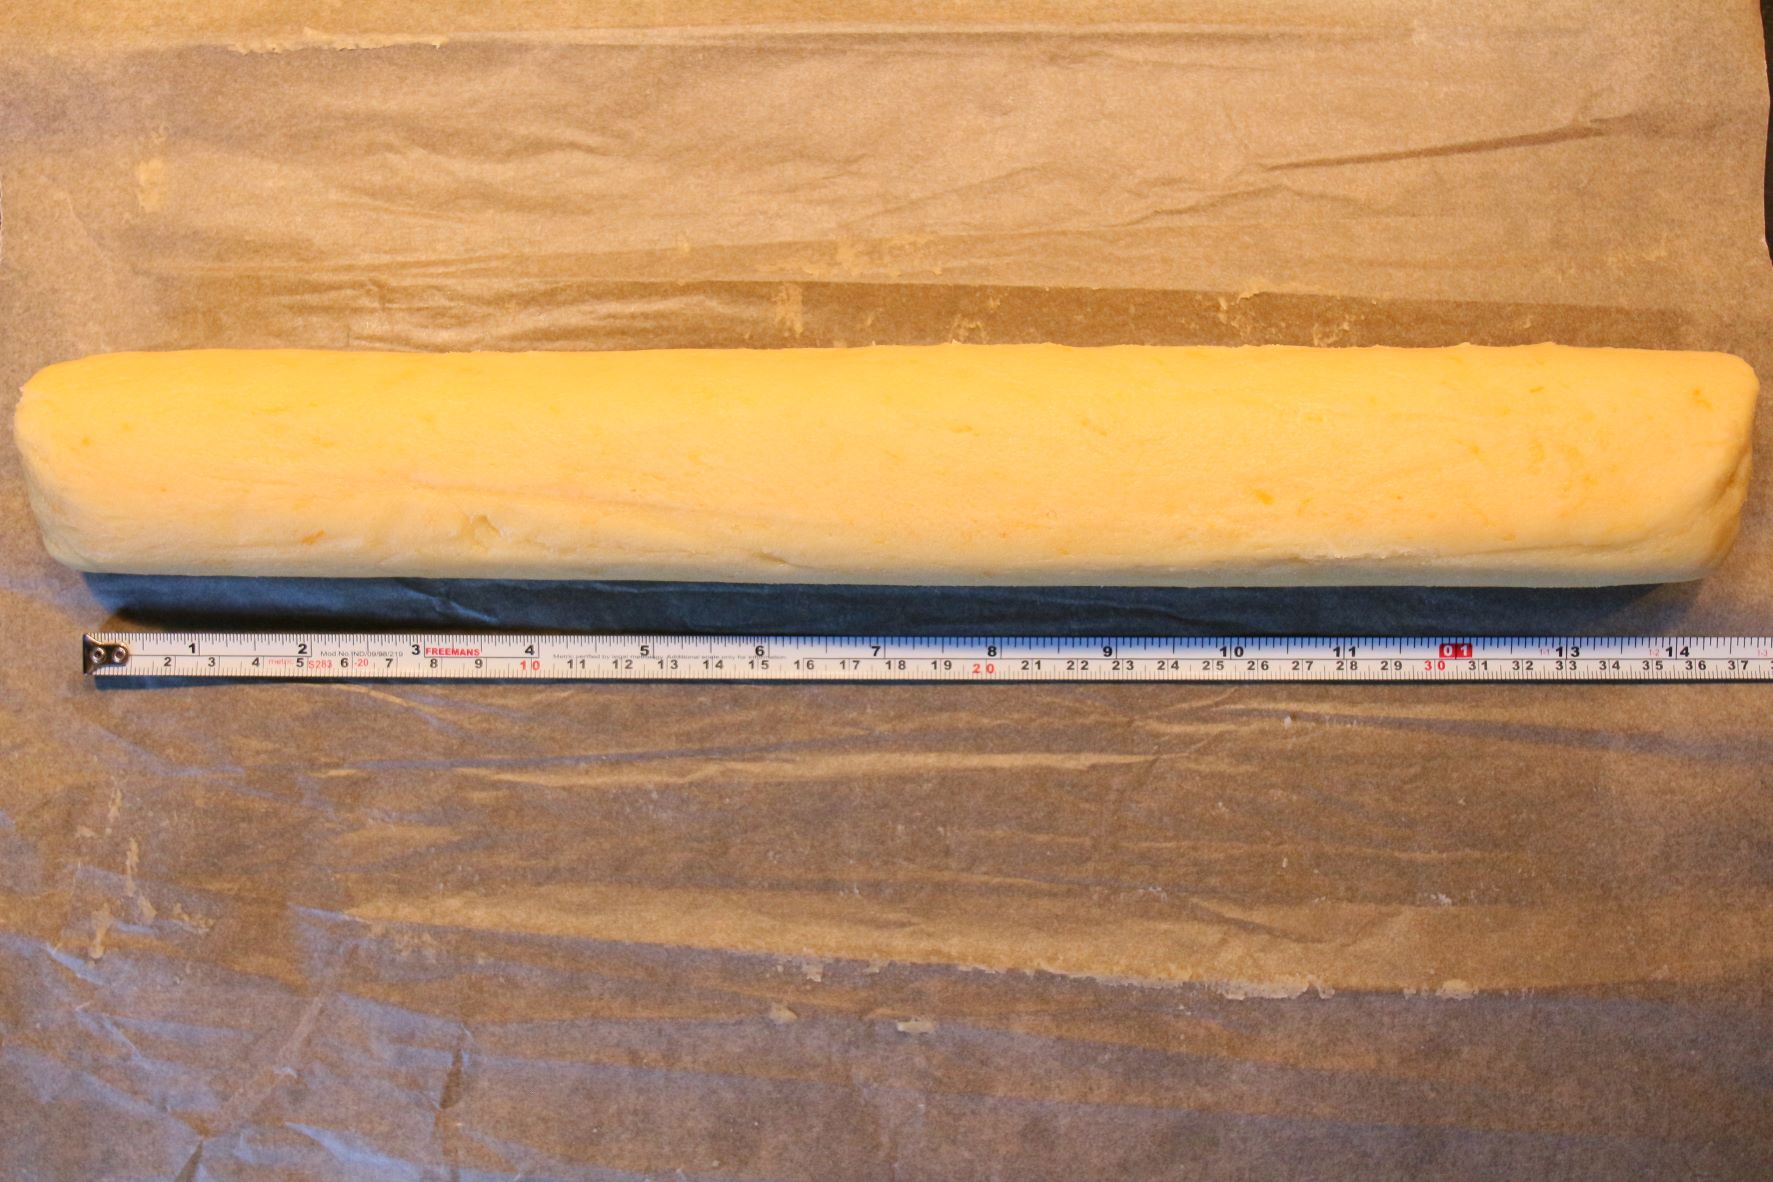 Dough rolled out into a log that is 14 inches long